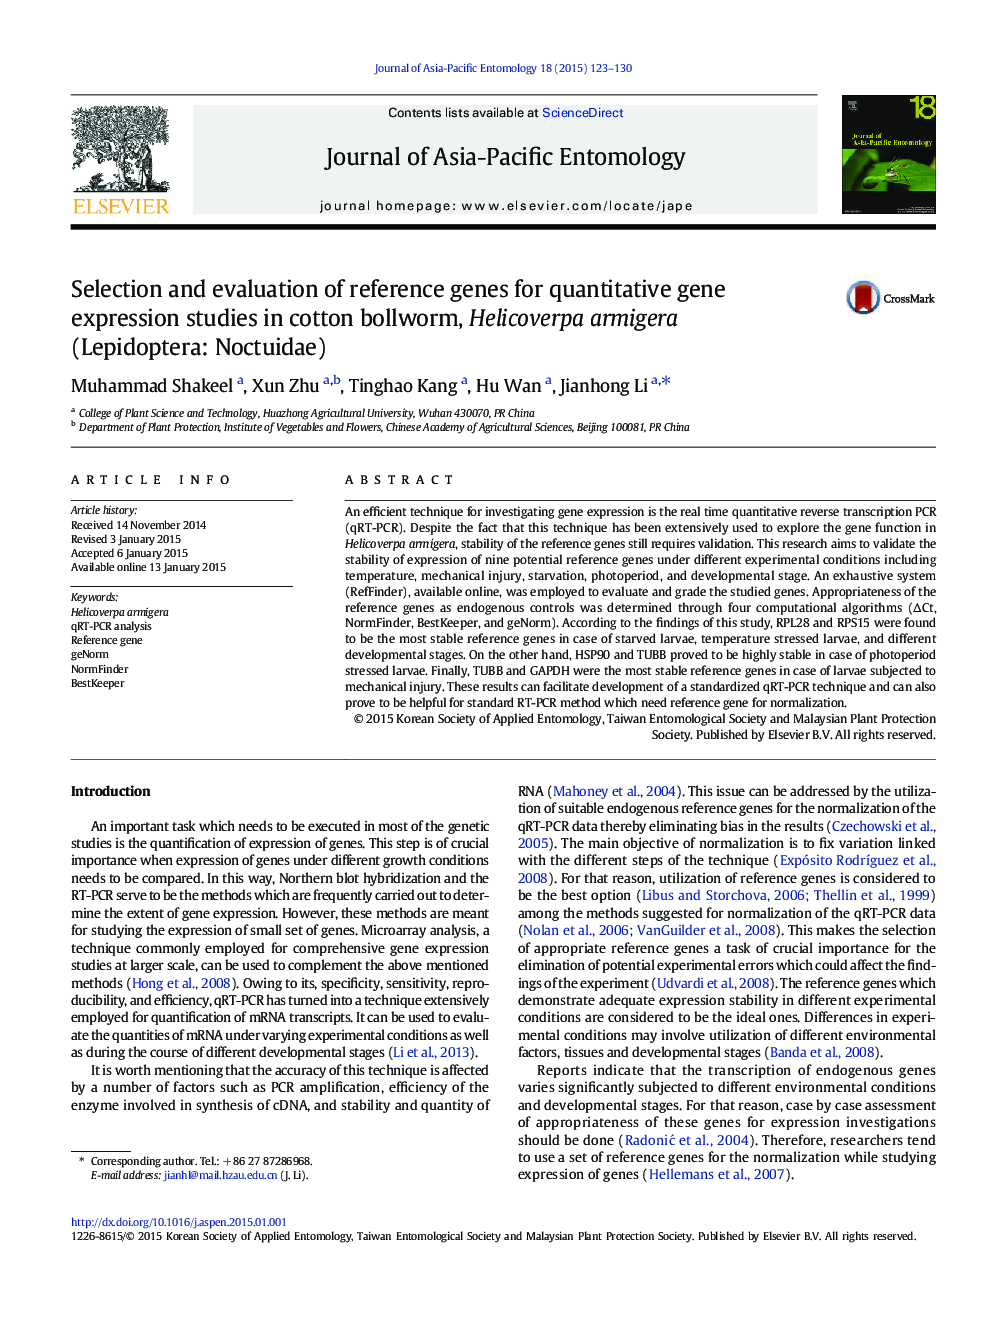 Selection and evaluation of reference genes for quantitative gene expression studies in cotton bollworm, Helicoverpa armigera (Lepidoptera: Noctuidae)